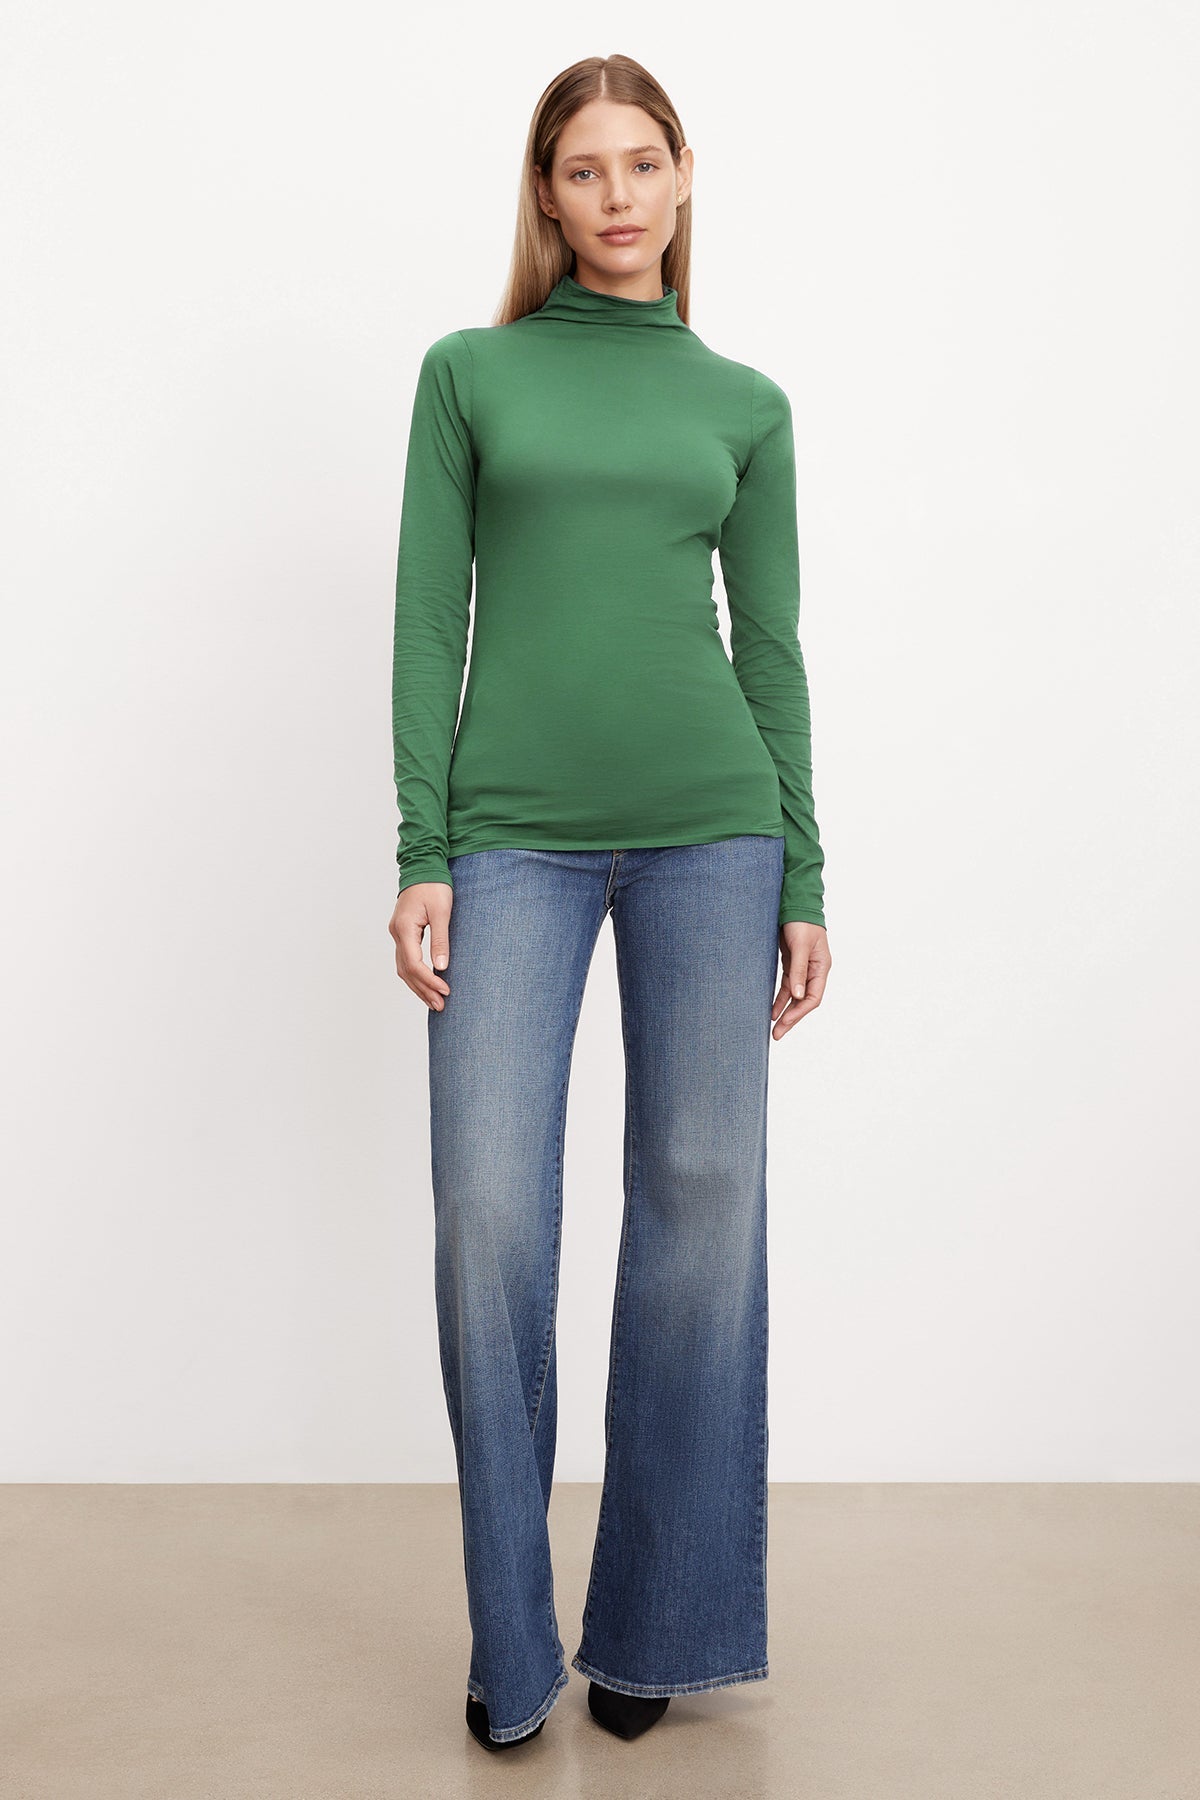 A woman donning a trendy TALISIA GAUZY WHISPER FITTED MOCK NECK TEE by Velvet by Graham & Spencer and flared jeans, showcasing her fashion world prowess.-36001491288257